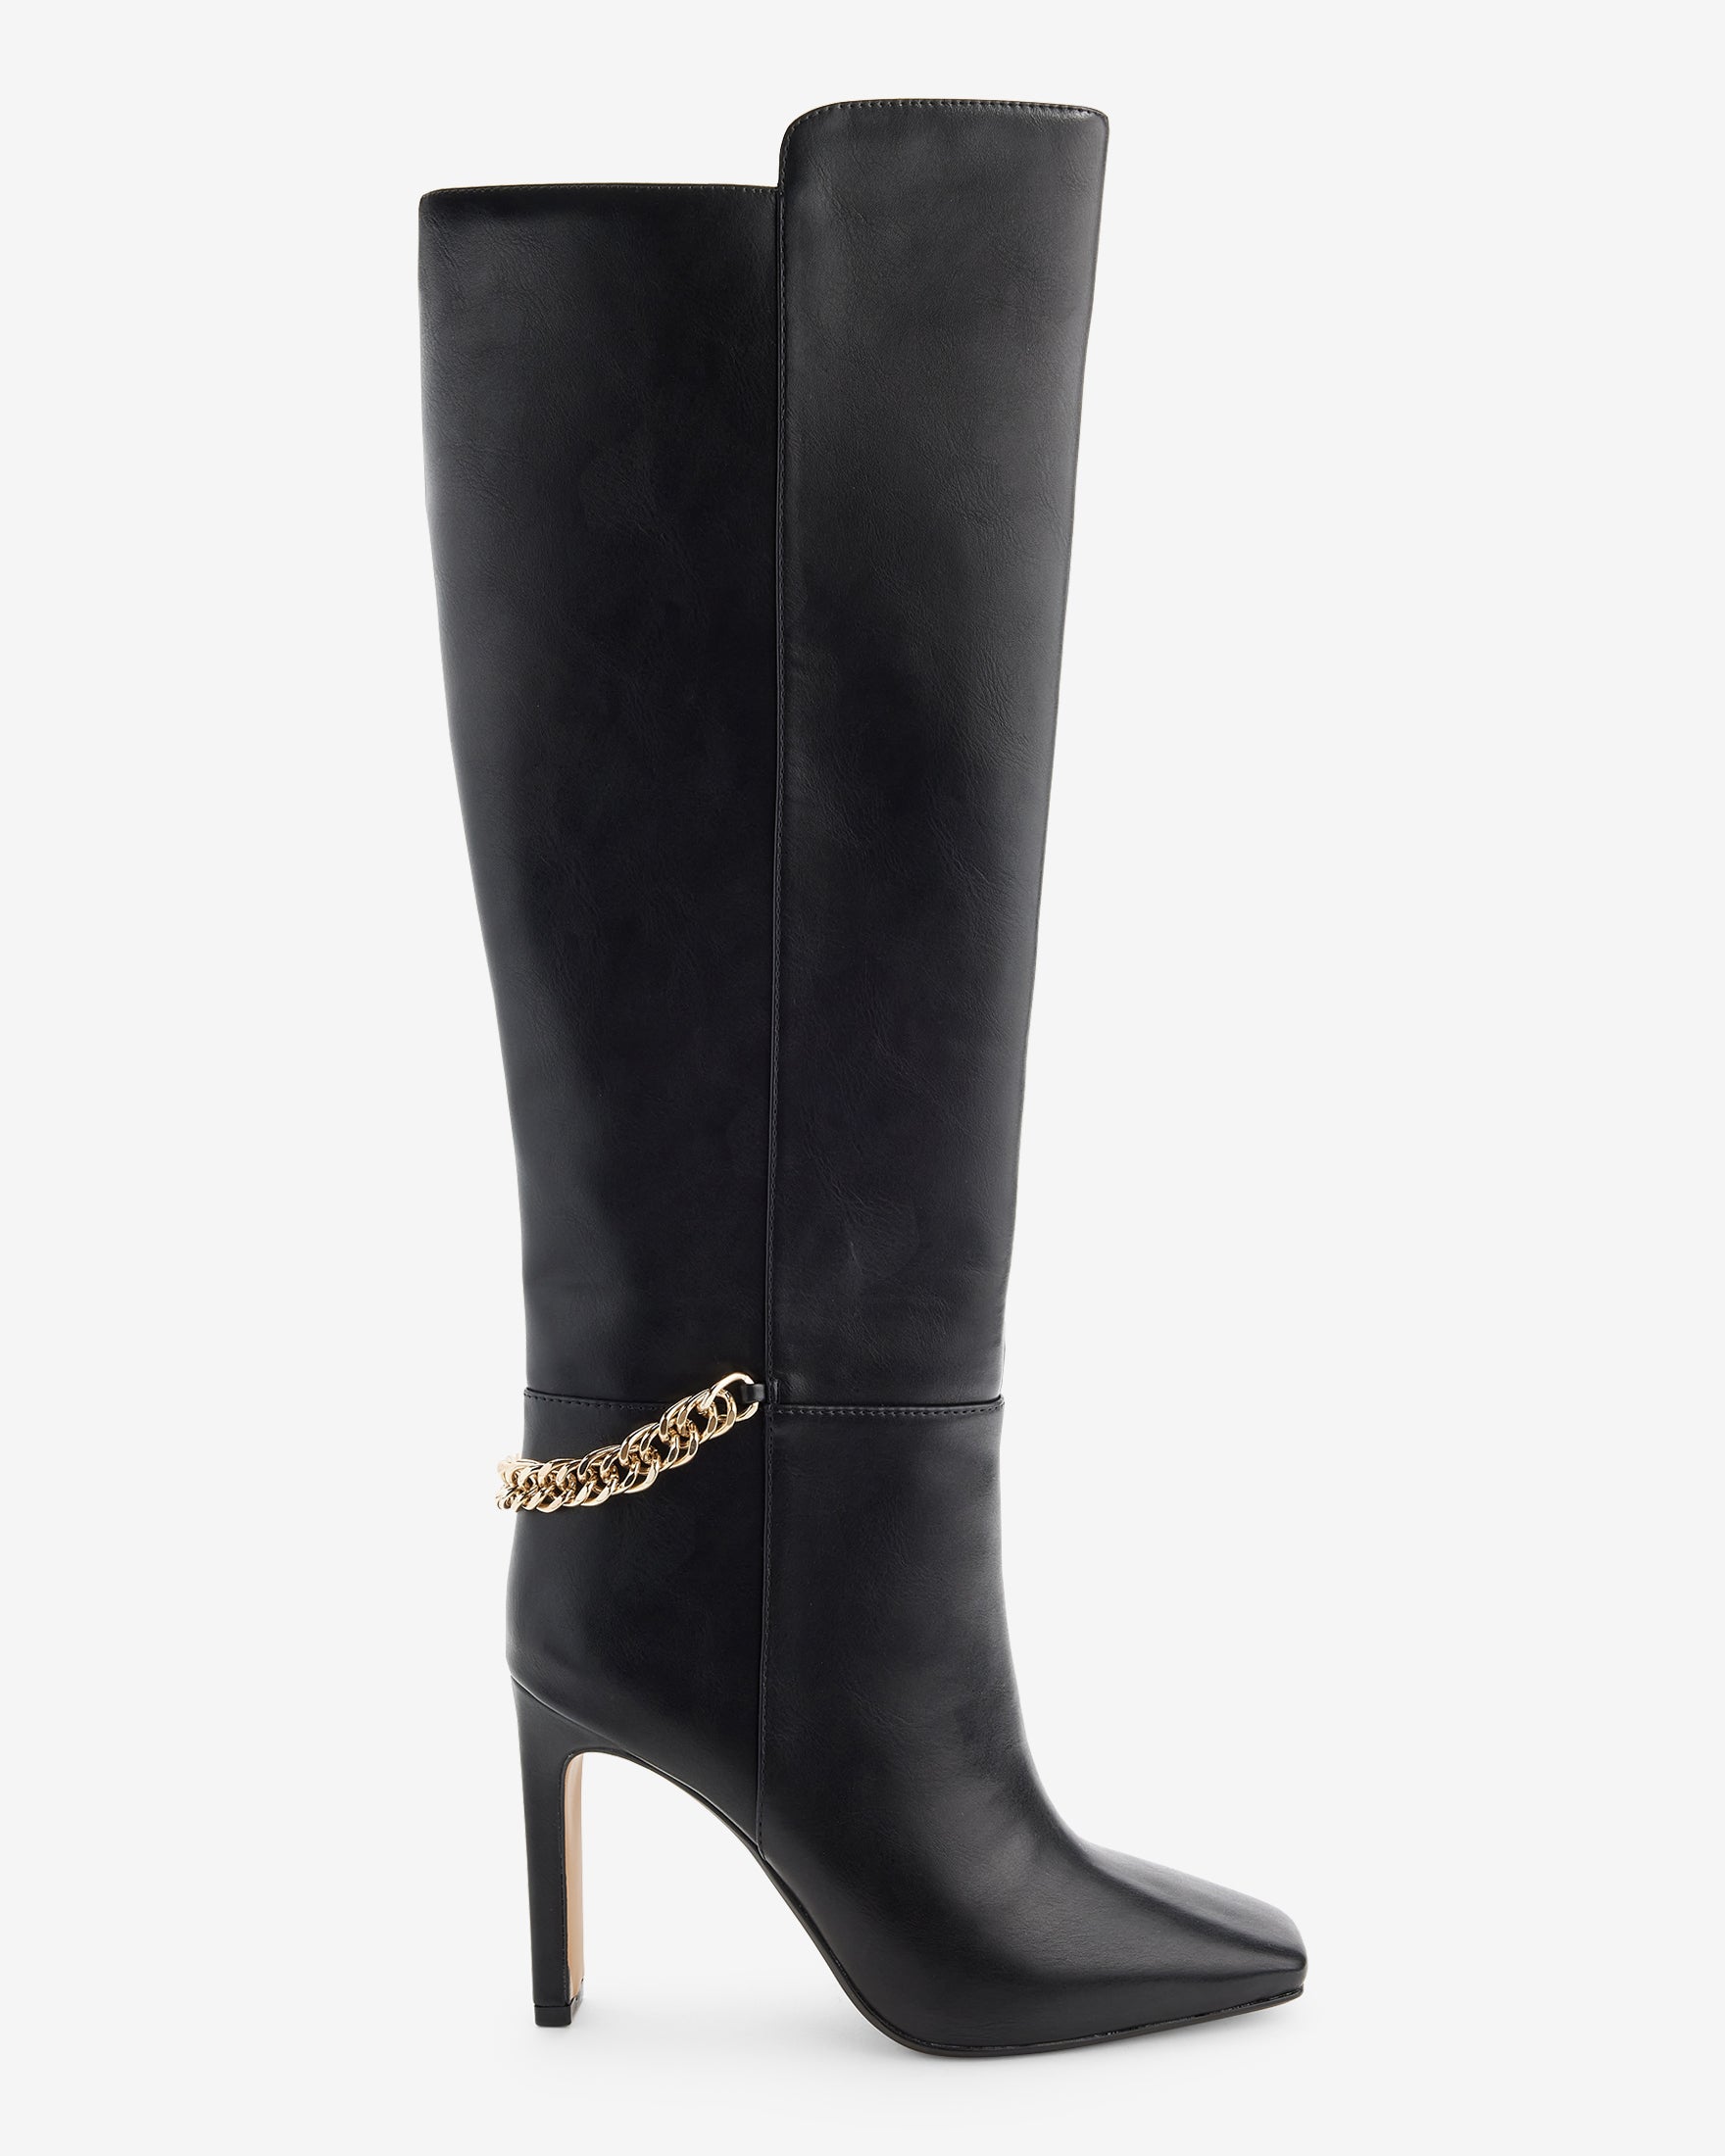 Tall black leather boots with thin gold chain covering back ankle area